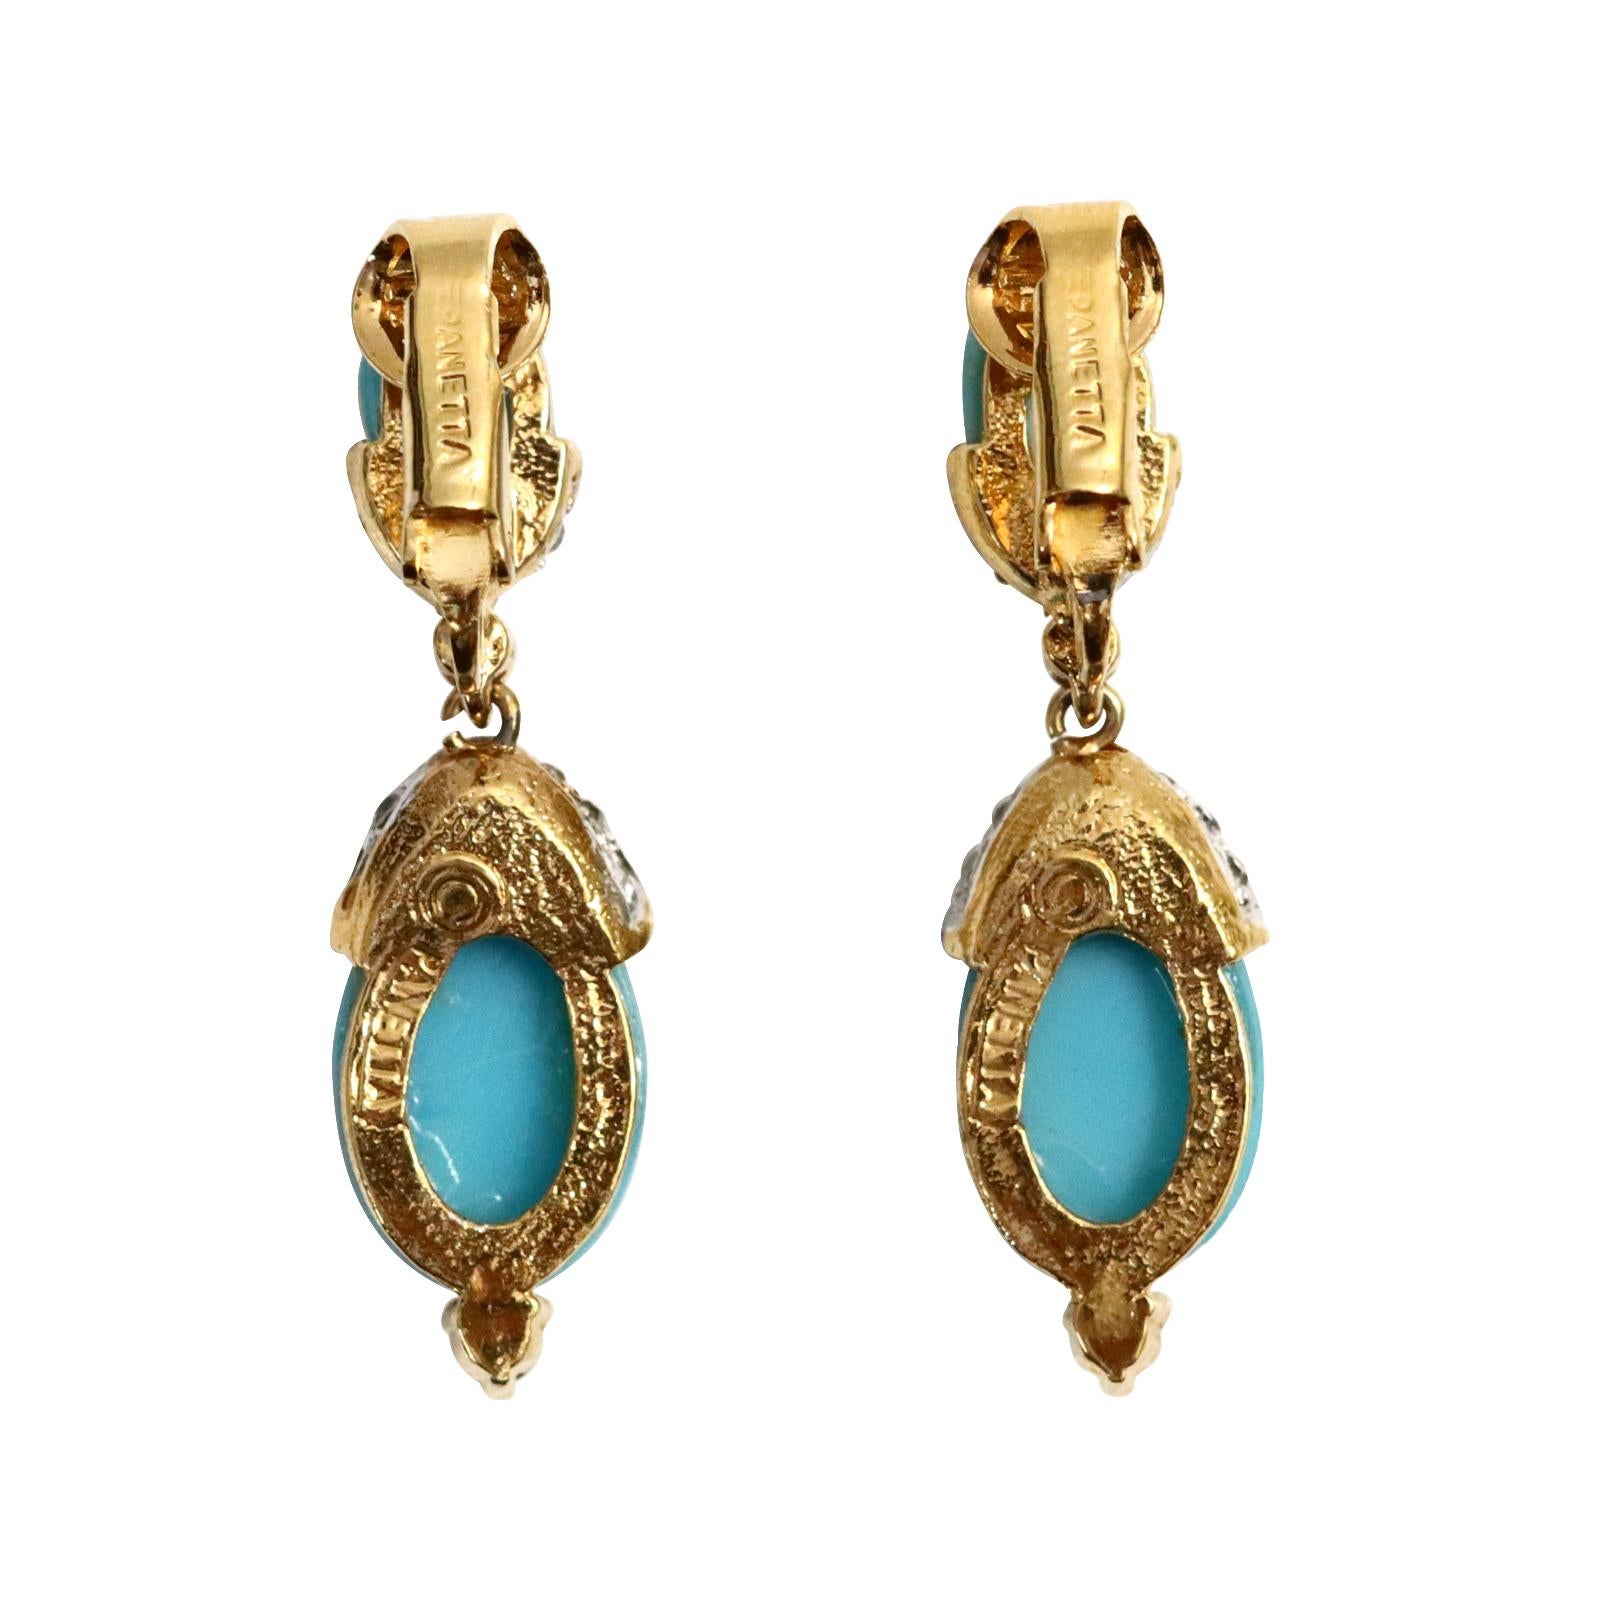 Artist Vintage Panetta Faux Turquoise Dangling Earrings Circa 1980s For Sale